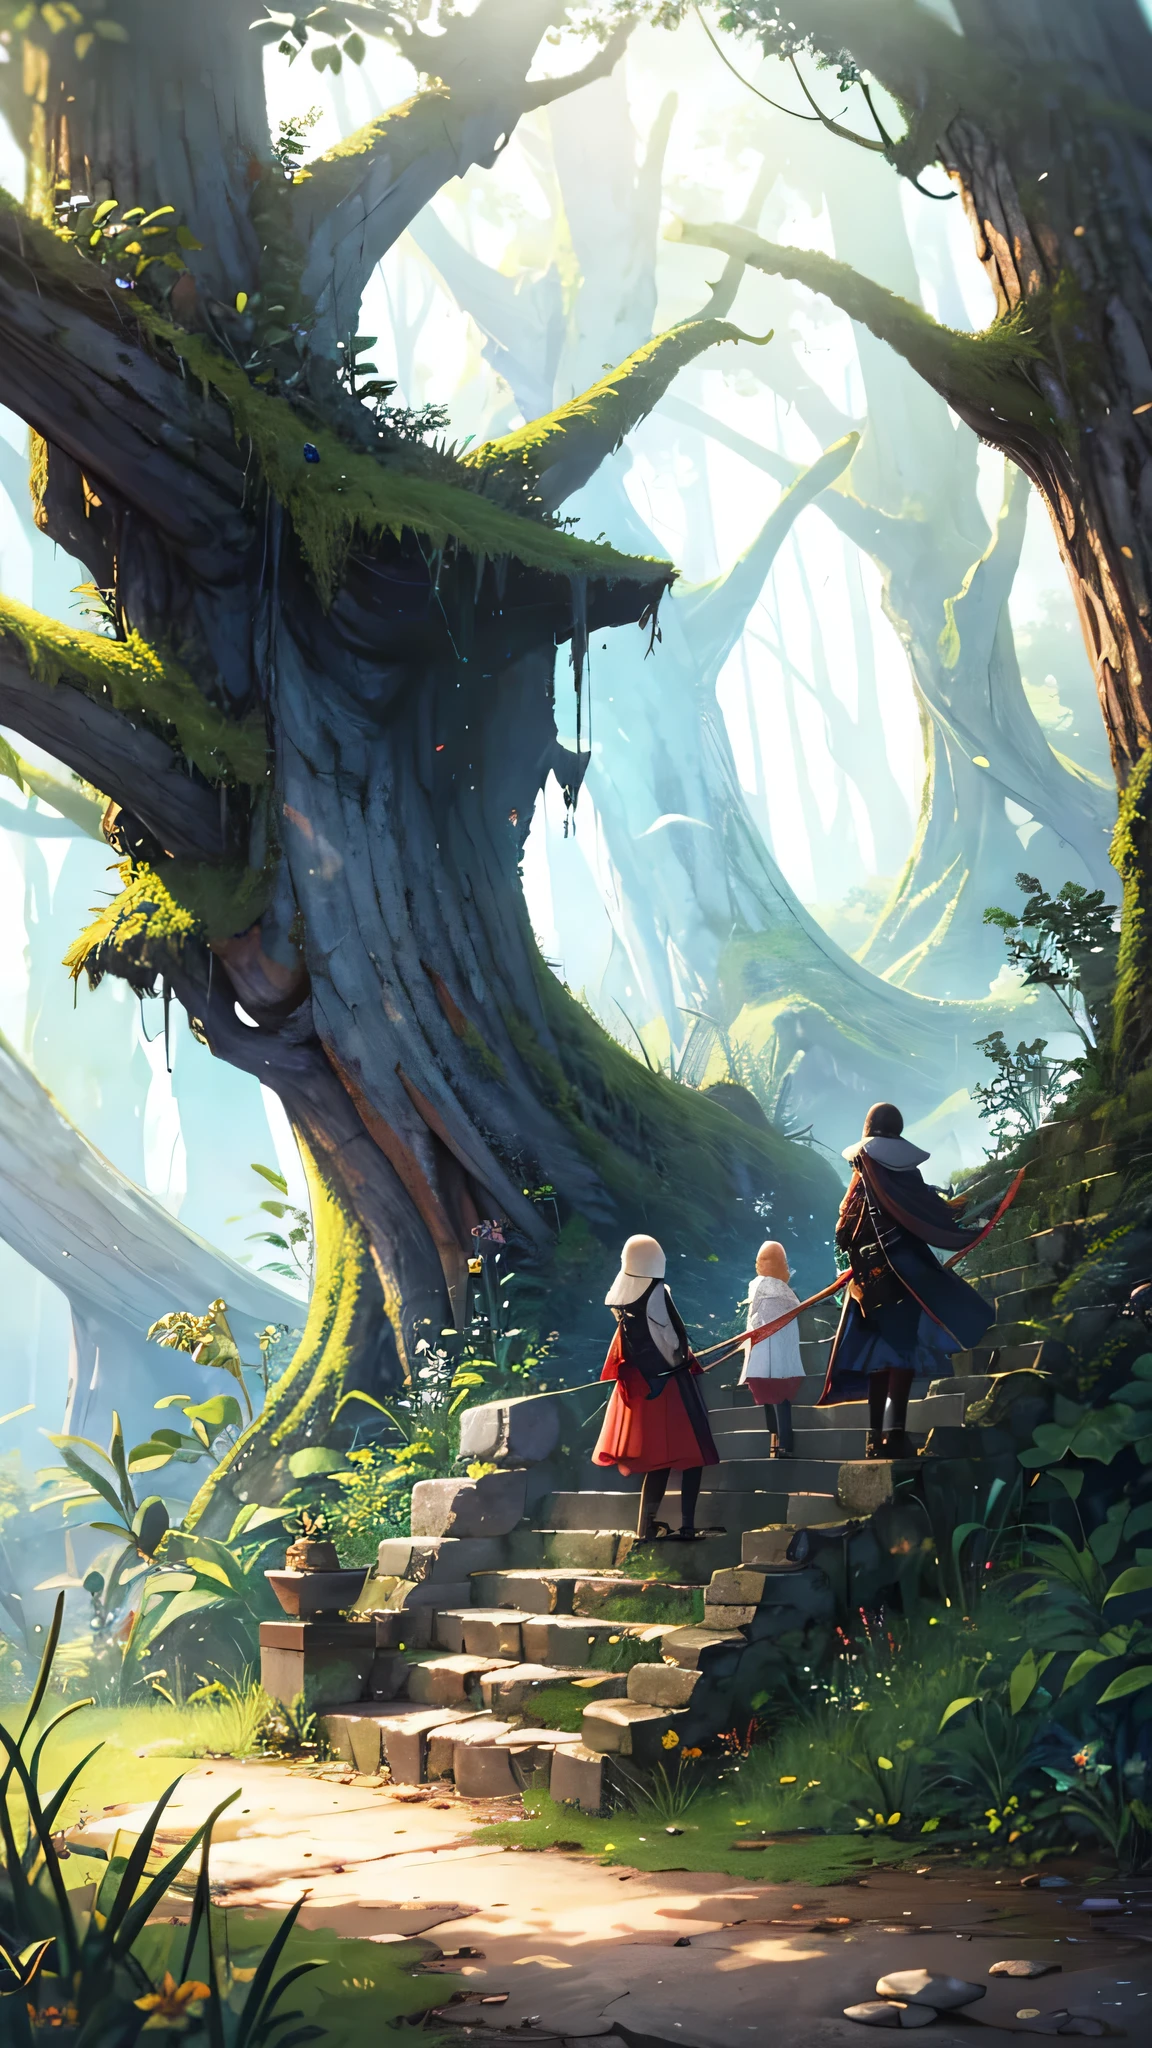 Ancient forest, It is expressed with very delicate and high-quality digital painting technology., Reach 8K resolution. This work、With its sharp focus、It&#39;s getting a lot of attention on the ArtStation website.。, Rich changes in light, Highly complex and detailed central structure. Inspired by artists like Lois van Baarle (Reusch), Ilya Kuvshinov, Studio Ghibli, The style of the website、The soft, watercolor-like colors capture the chibi-kawaii aesthetic.。.